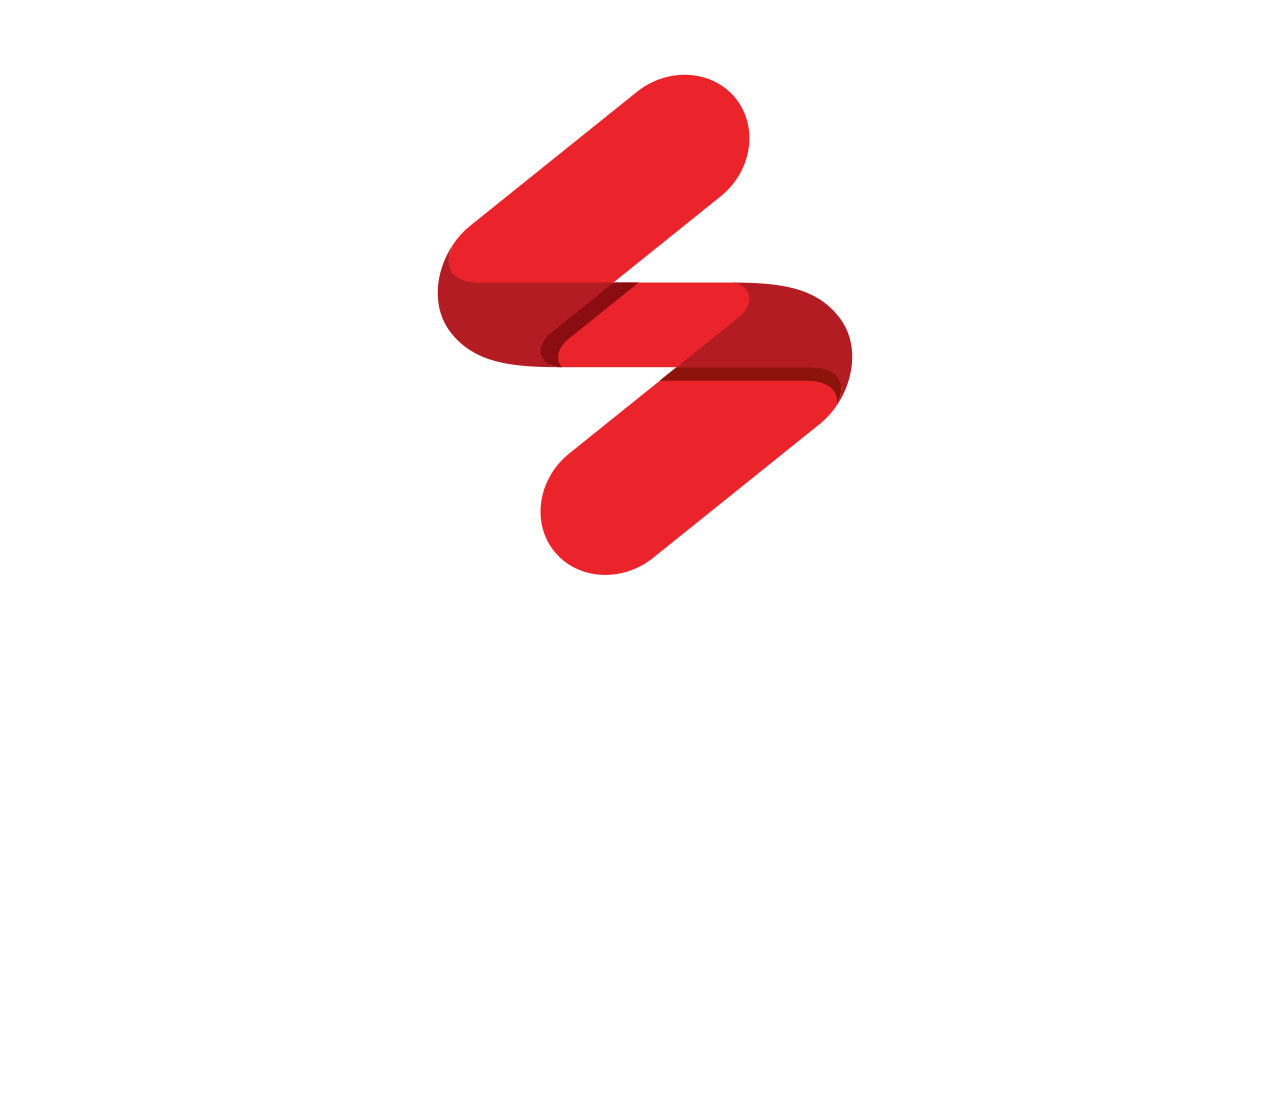 SRS's web page